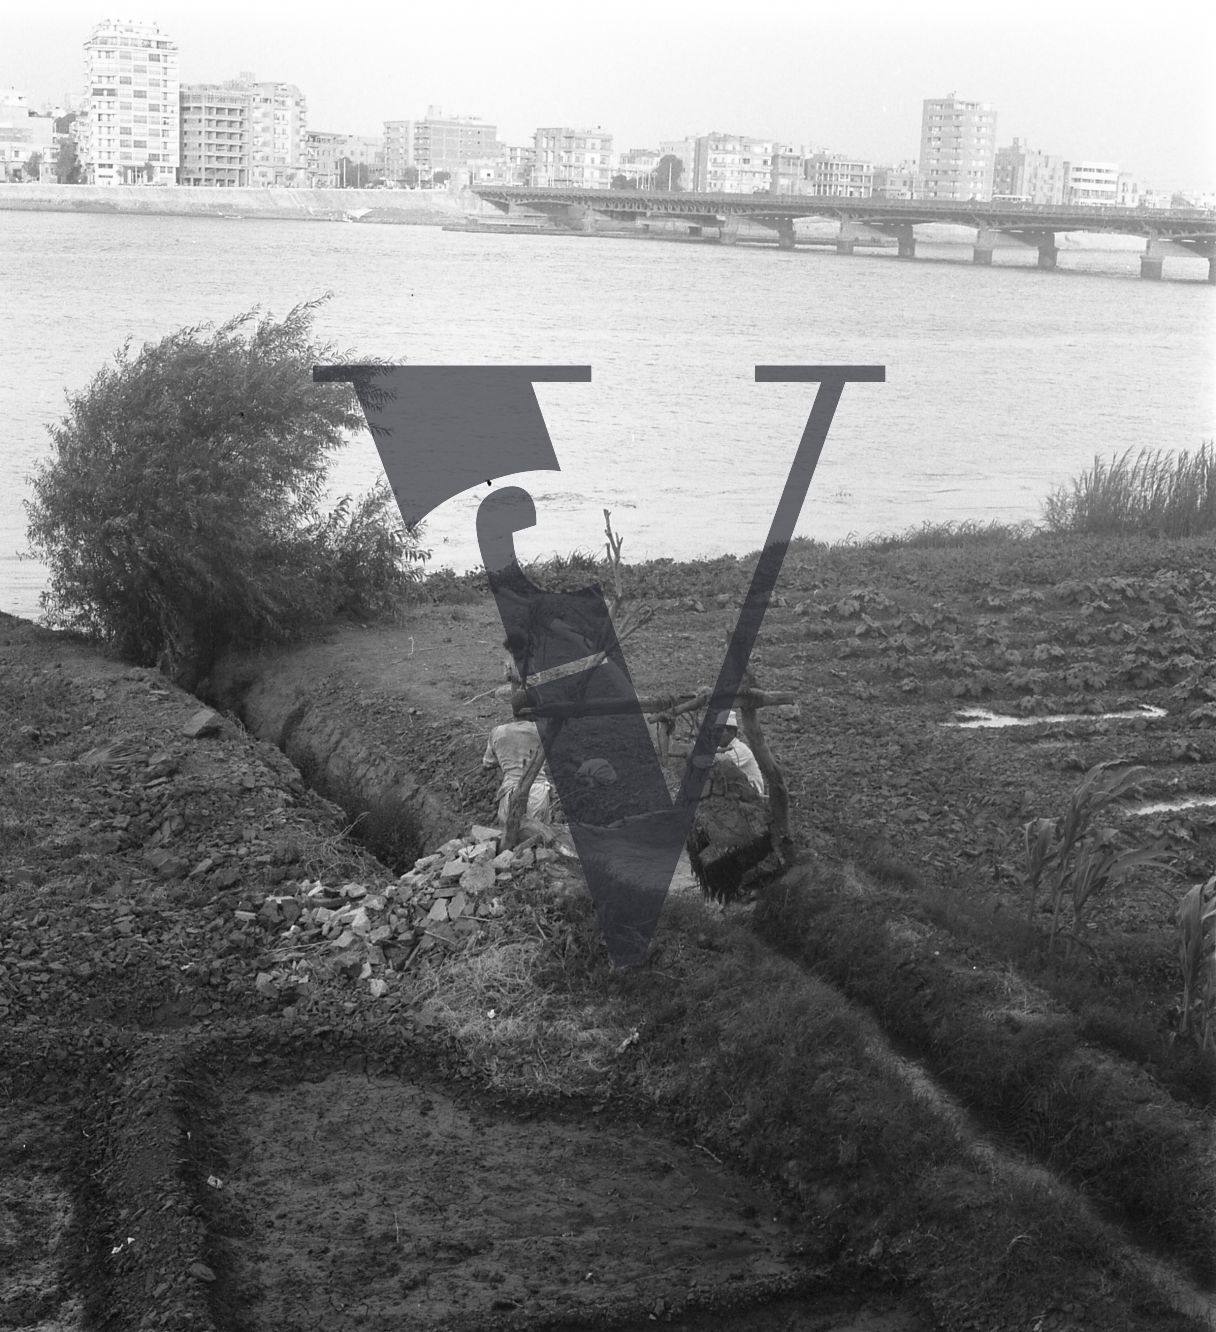 Harrania, Egypt, ploughing by the riverbank.